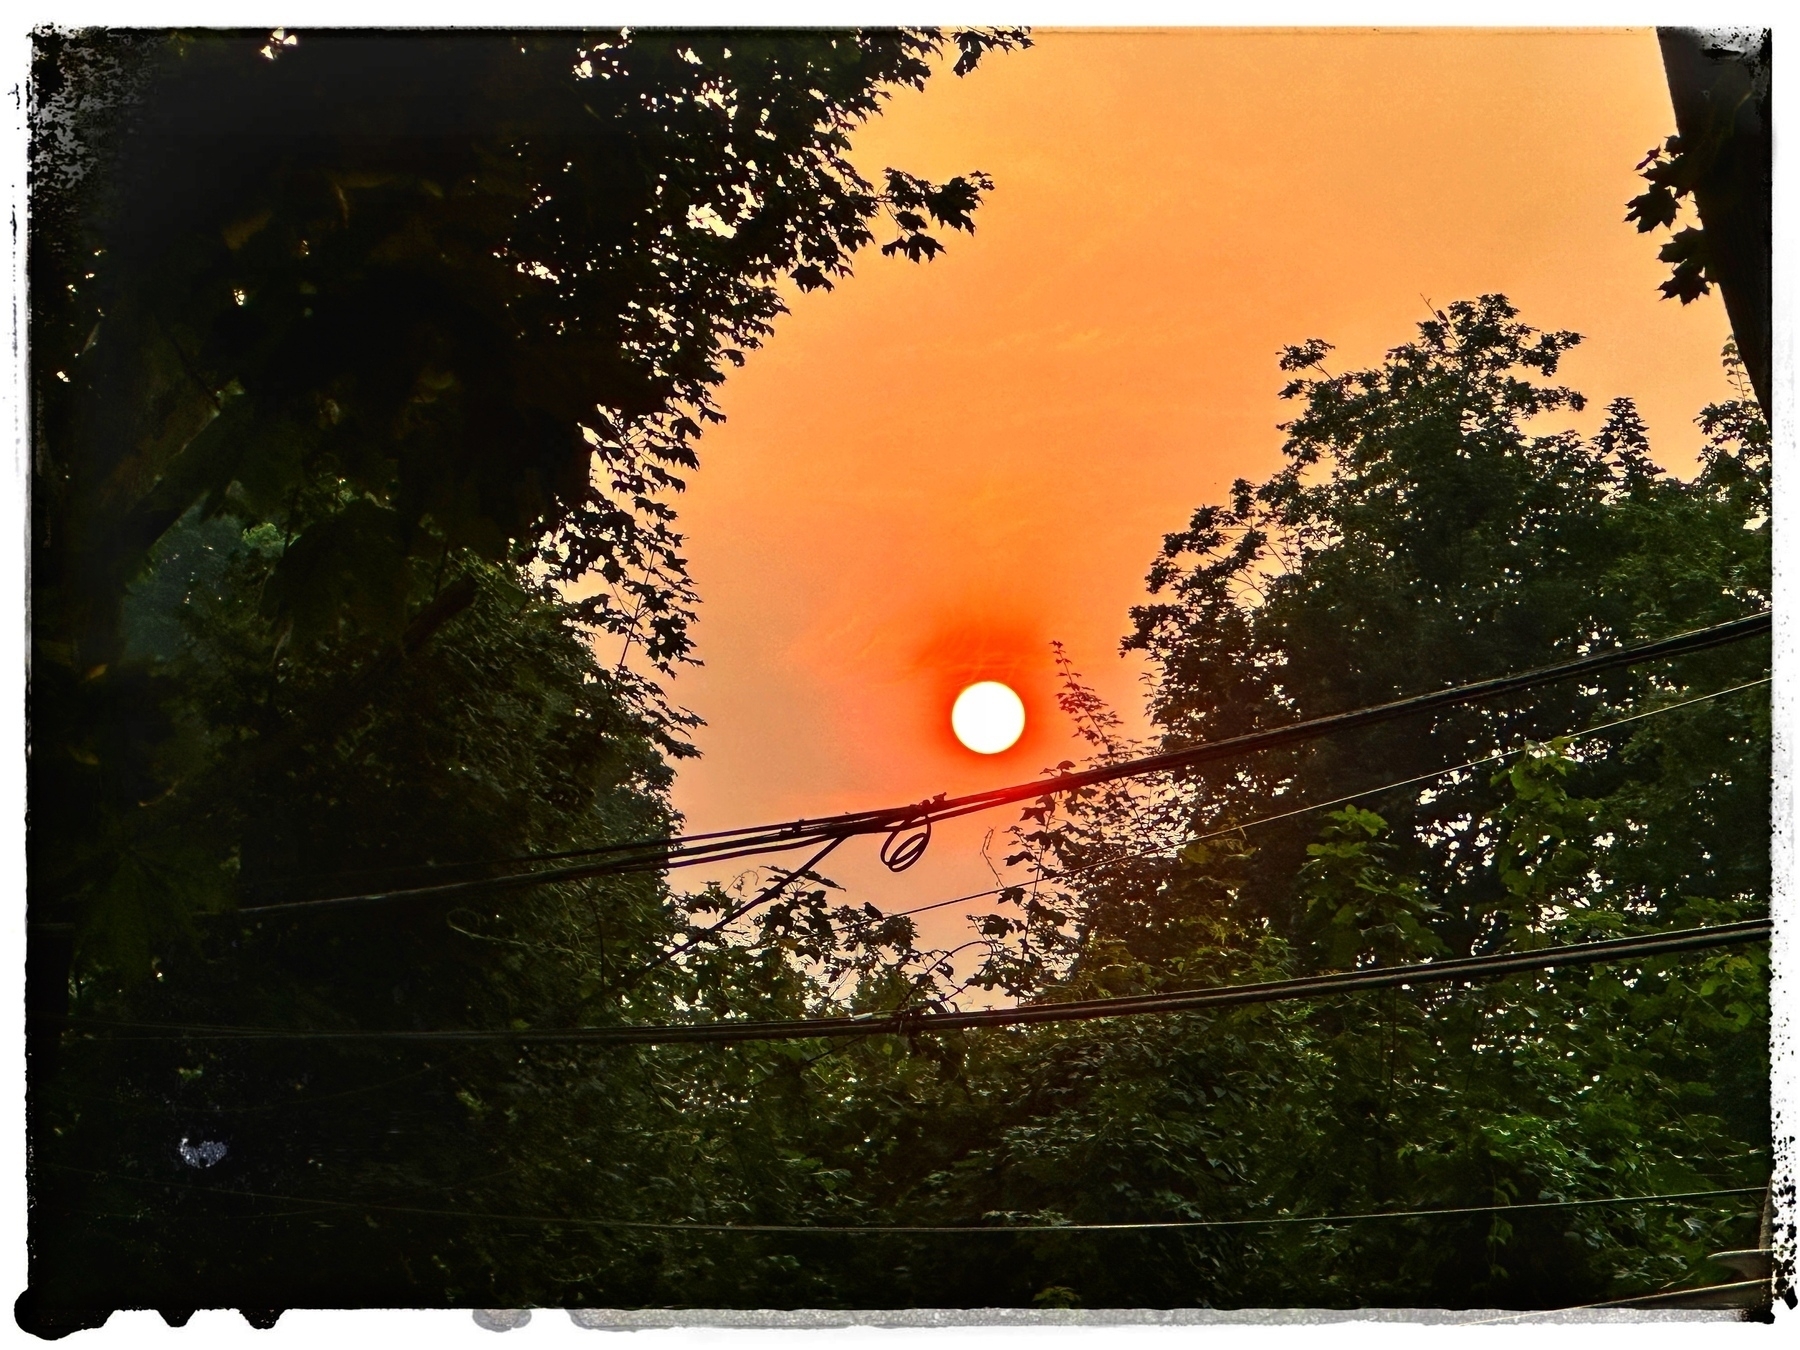 A very red sun in a hazy sky framed by trees and power lines. 